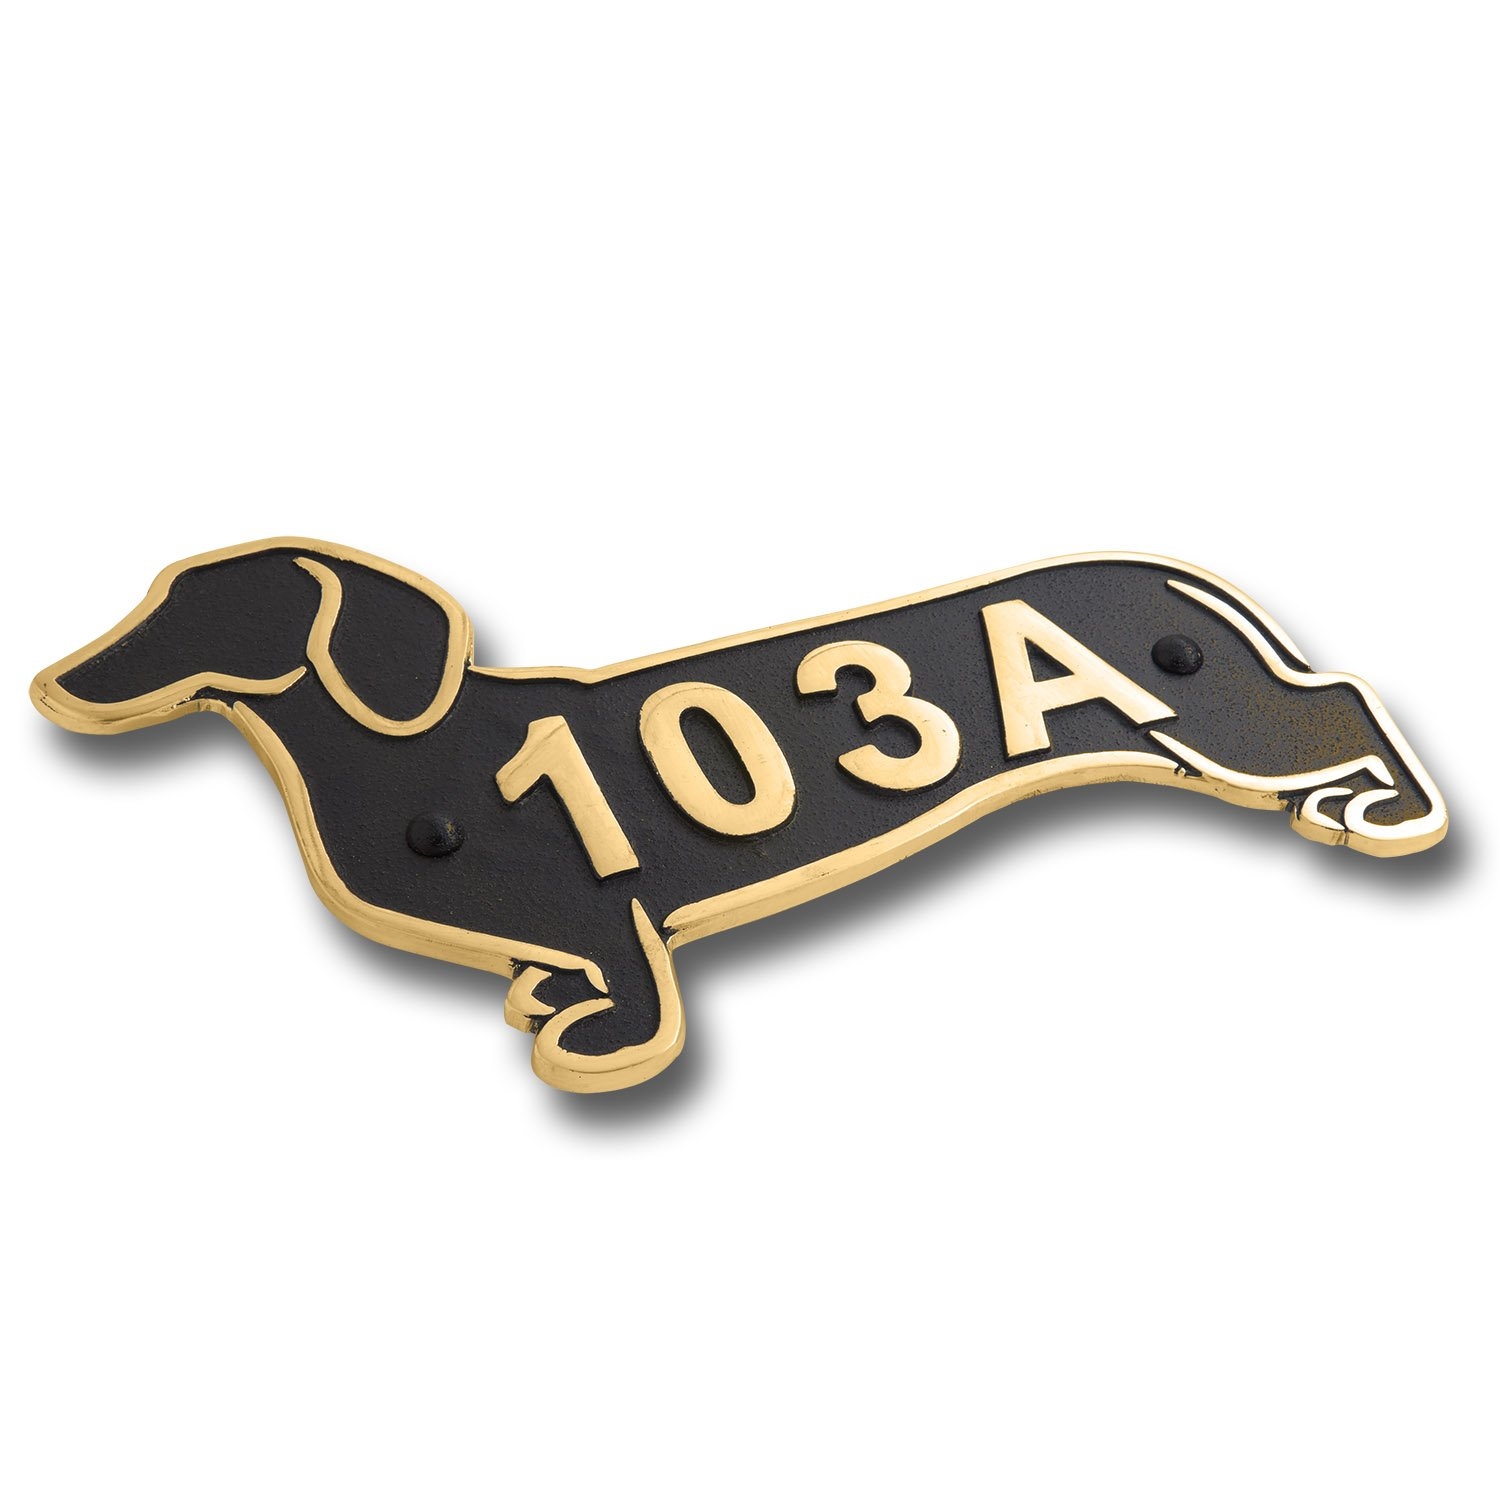 Dachshund Metal House Number Address Plaque. Sausage Dog Gift Idea For A Dachshund Owner. Yard Or Garden Dachshund Décor Makes A Great Gift For Him Or Her – Brass & Black